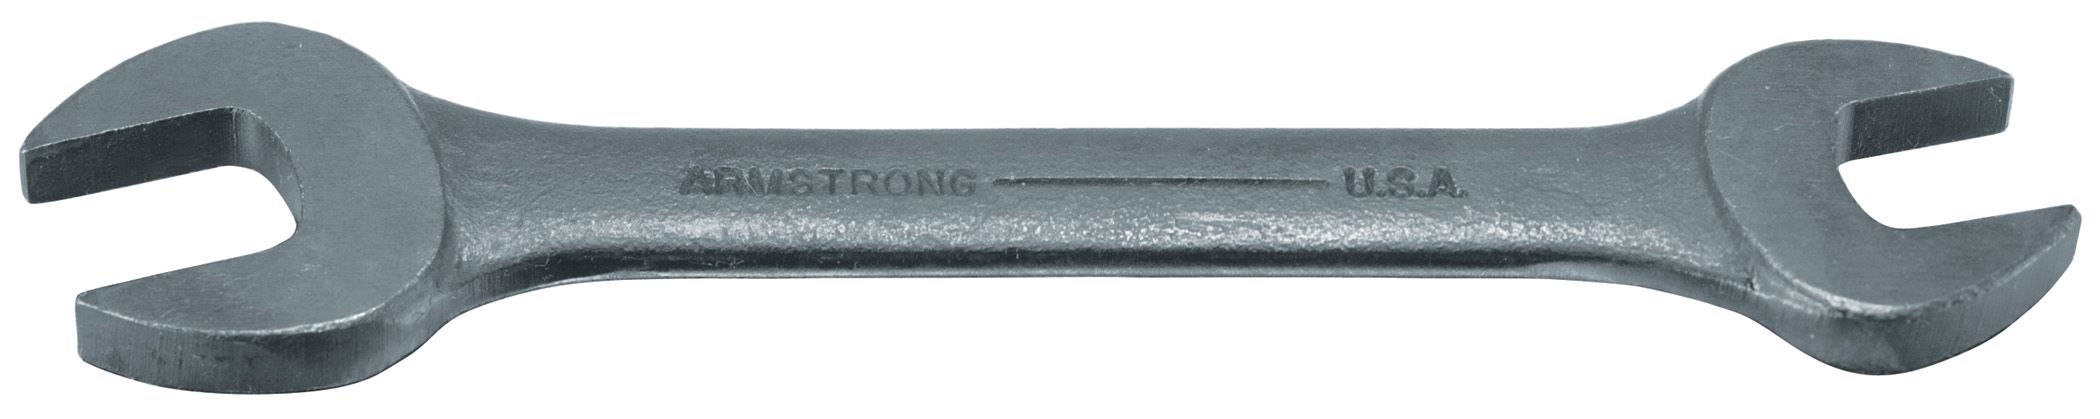 Armstrong 15/16 x 1 in. Black Oxide Open End Wrench